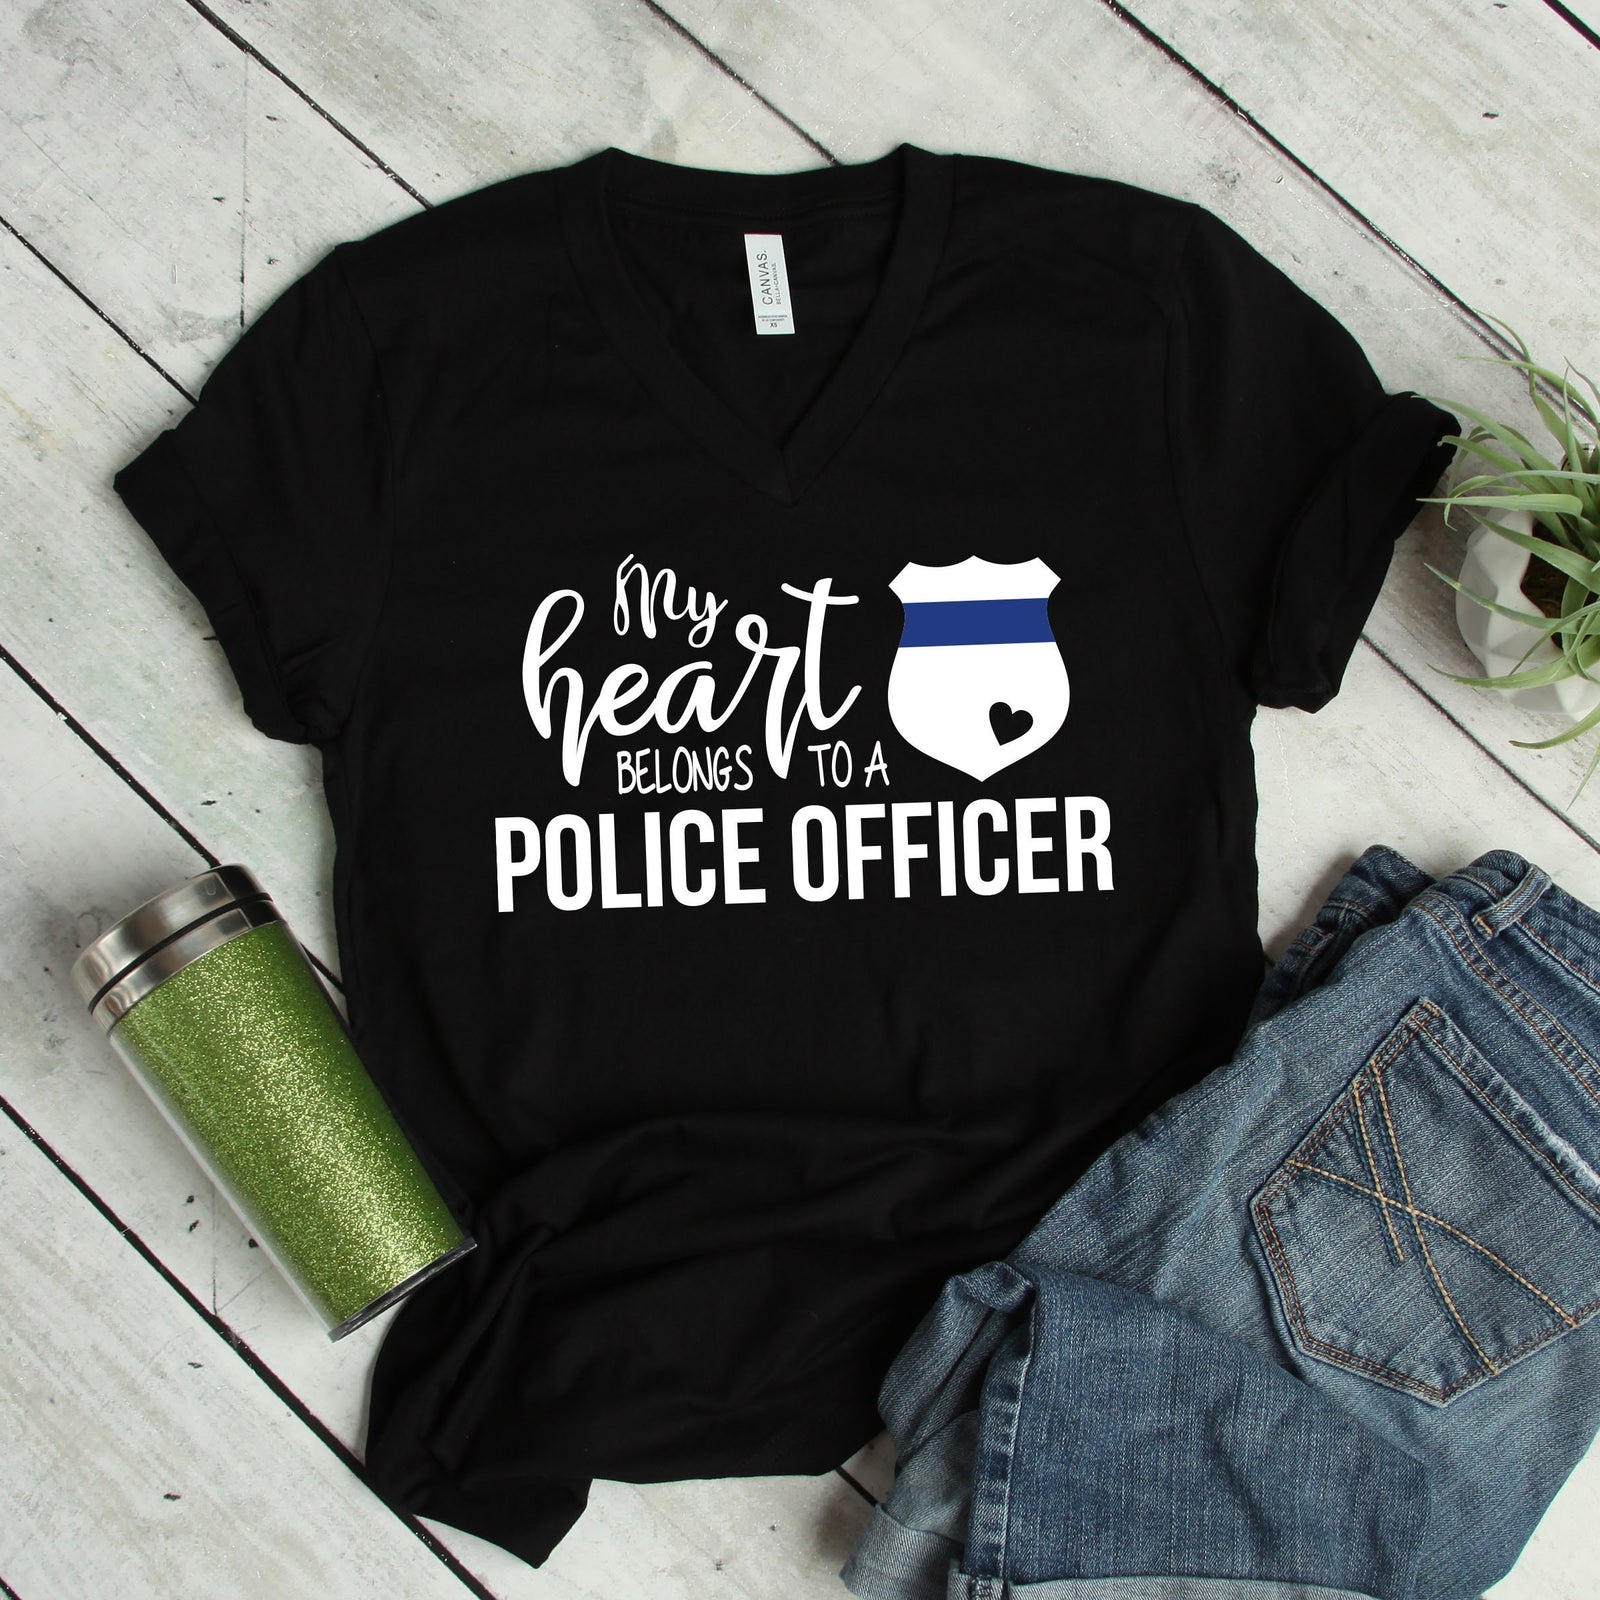 My Heart Belongs to a Police Officer - Police Officer Wife Shirt - Police Officer Love T Shirt - Police Wife Gift Shirt